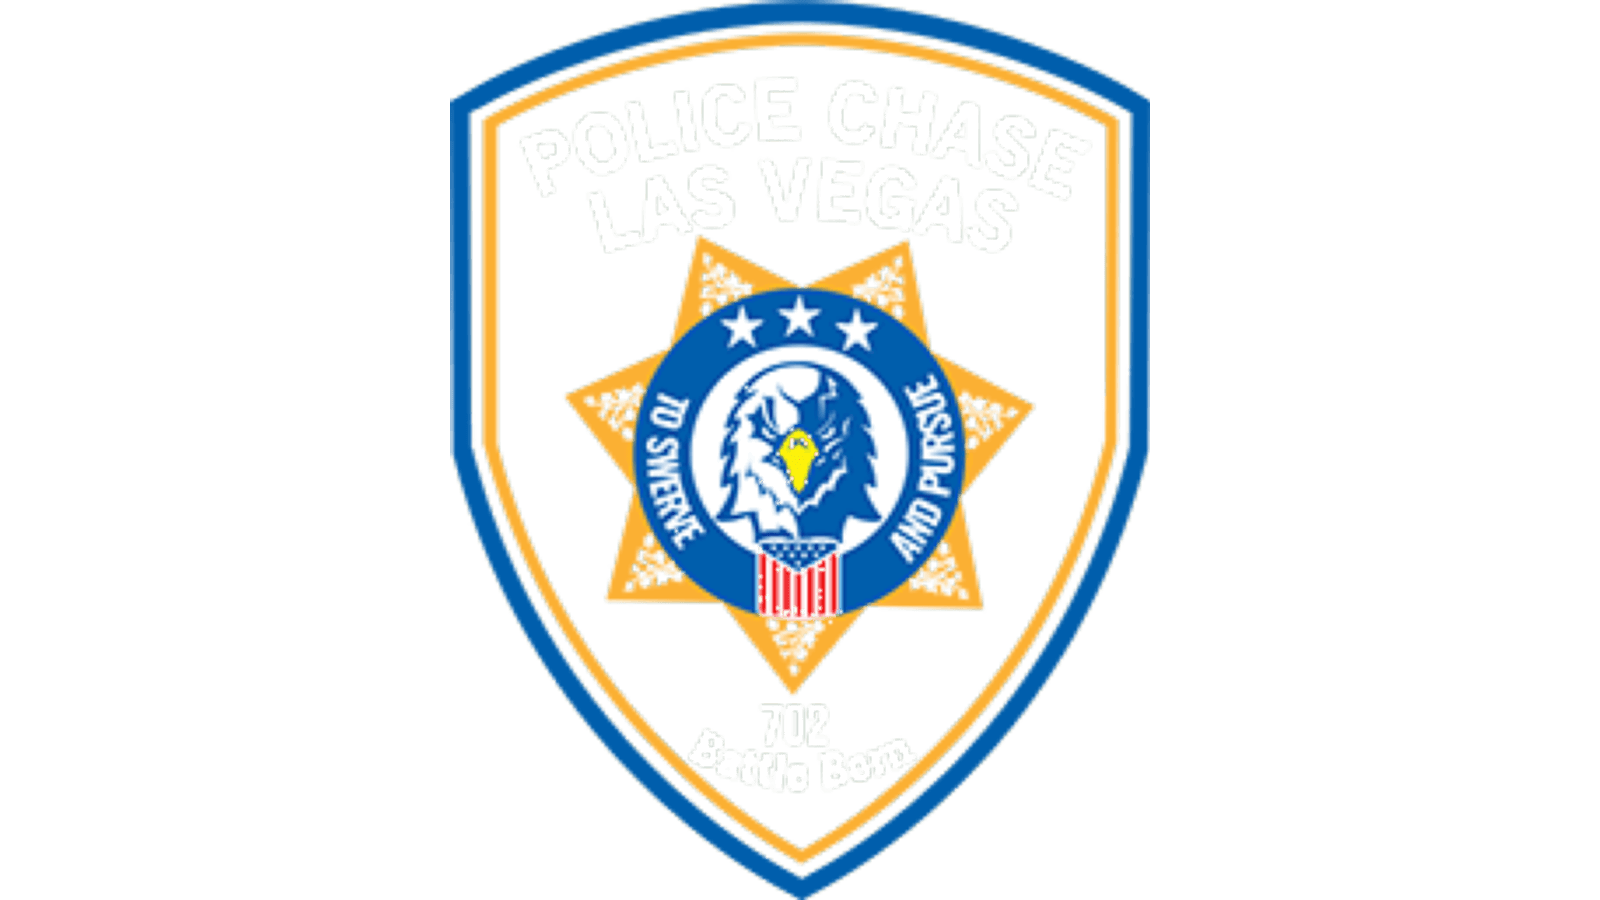 Police Chase Las Vegas coming to LVMS in January. News. Media